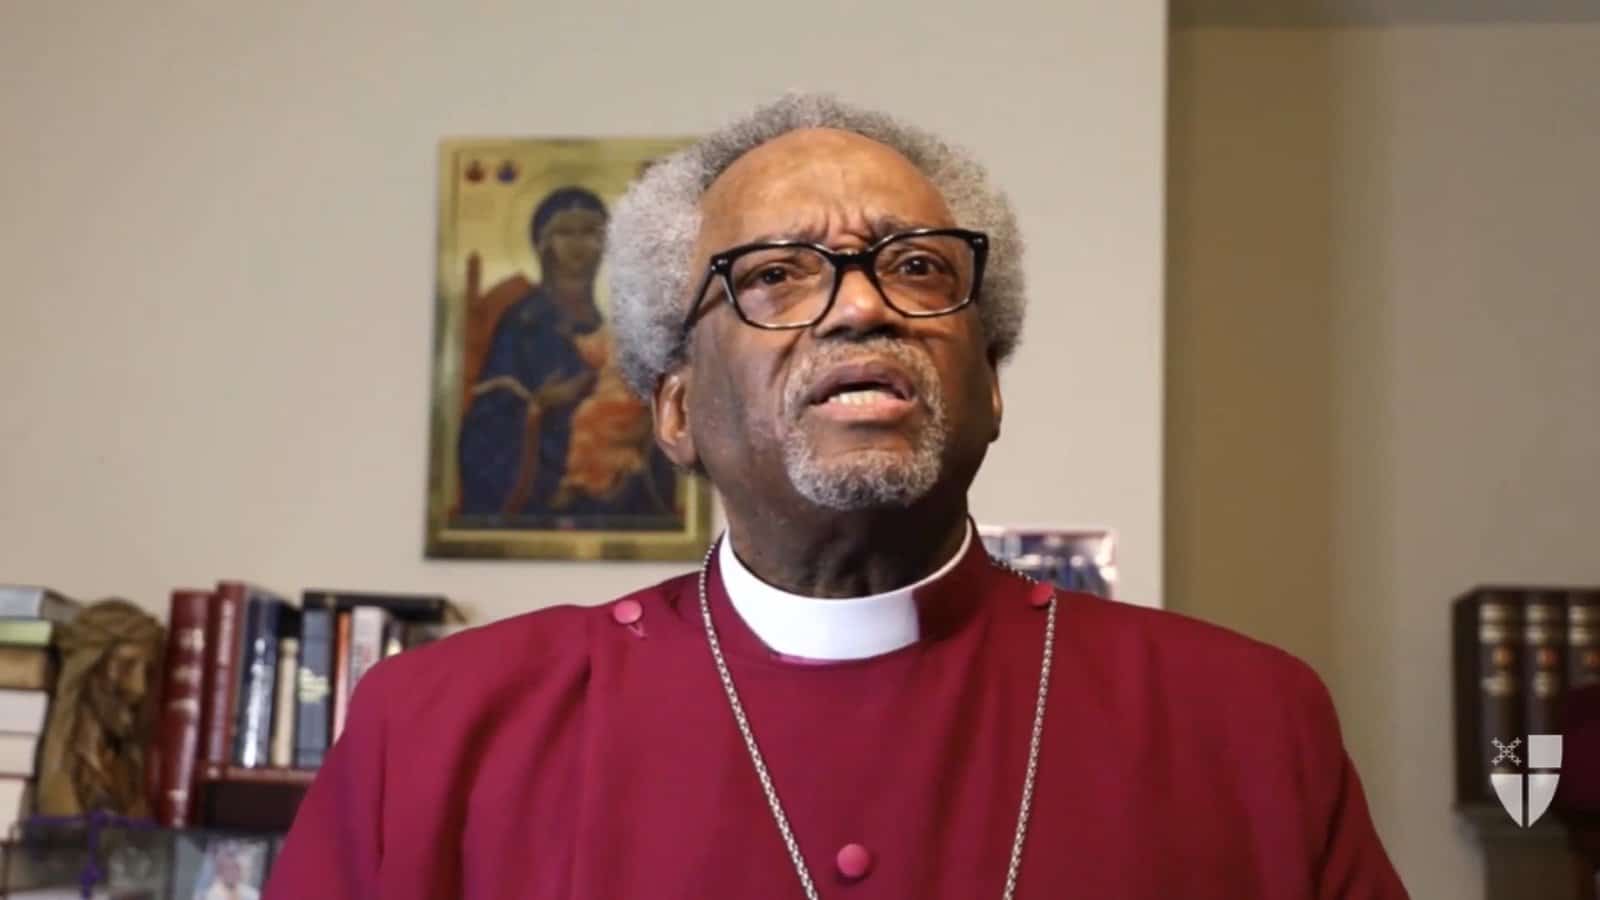 Presiding Bishop Michael Curry, Word to the Church: Who shall we be?